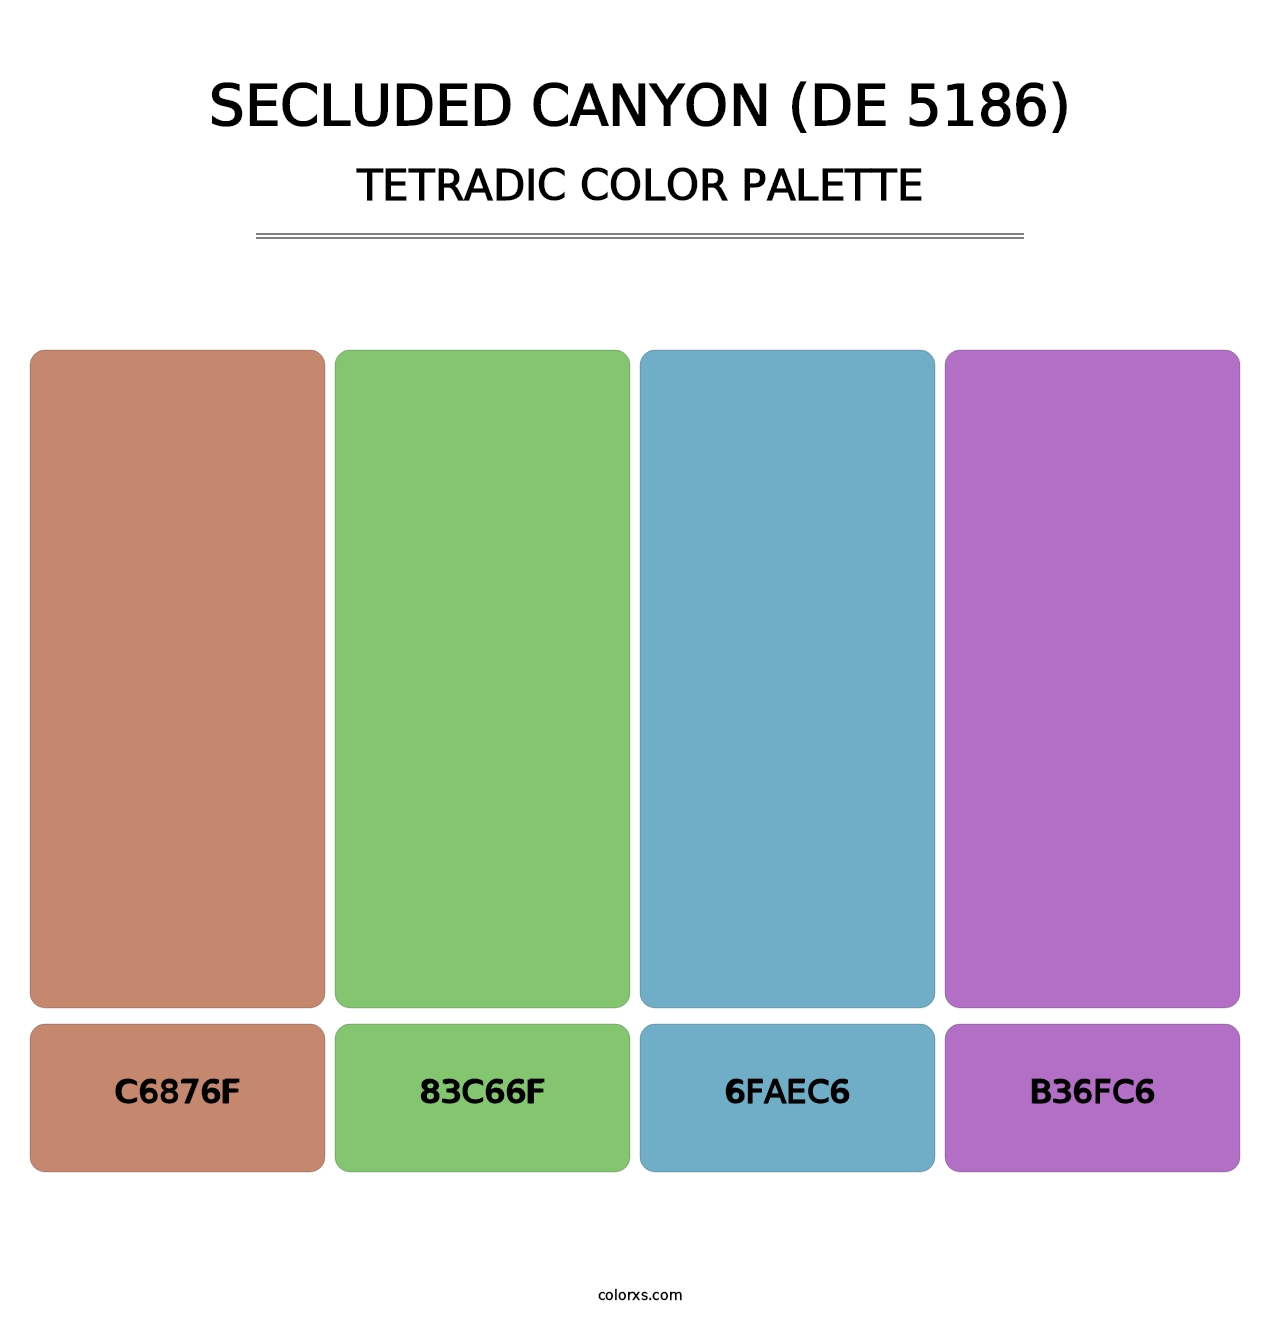 Secluded Canyon (DE 5186) - Tetradic Color Palette